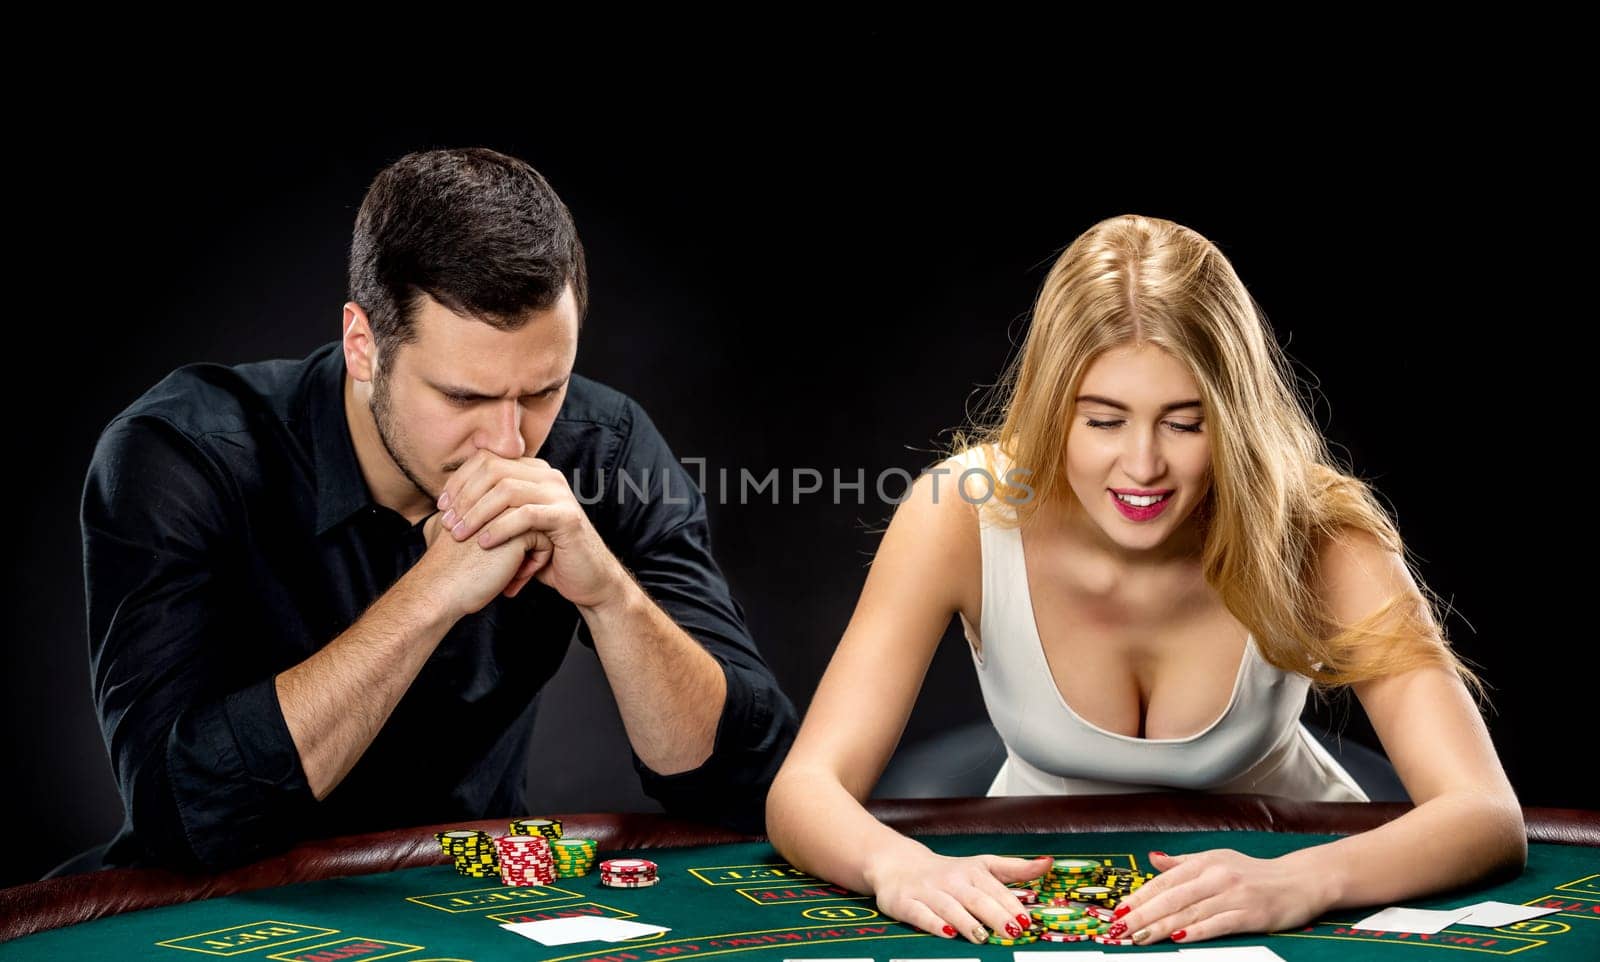 Two poker players sitting at a poker table on black background and going all-in pushing his chips forward